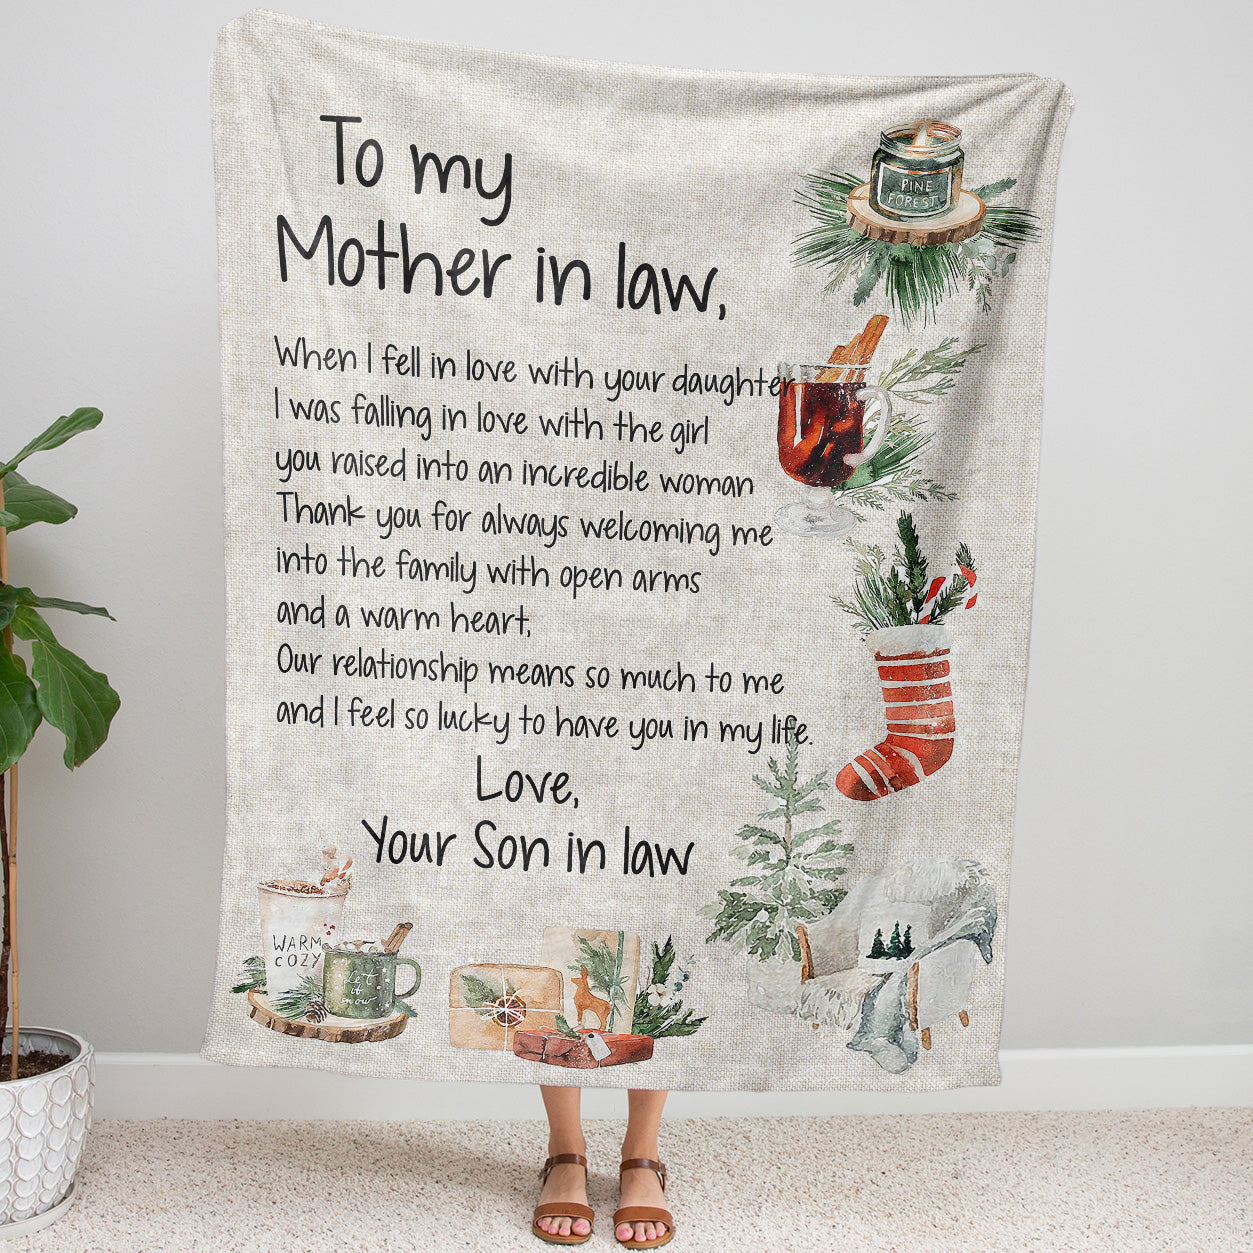 Blanket Christmas Gift ideas for Mother in Law from Son in Law Customize Personalize Love with Your Daughter 20121109 - Fleece Blanket